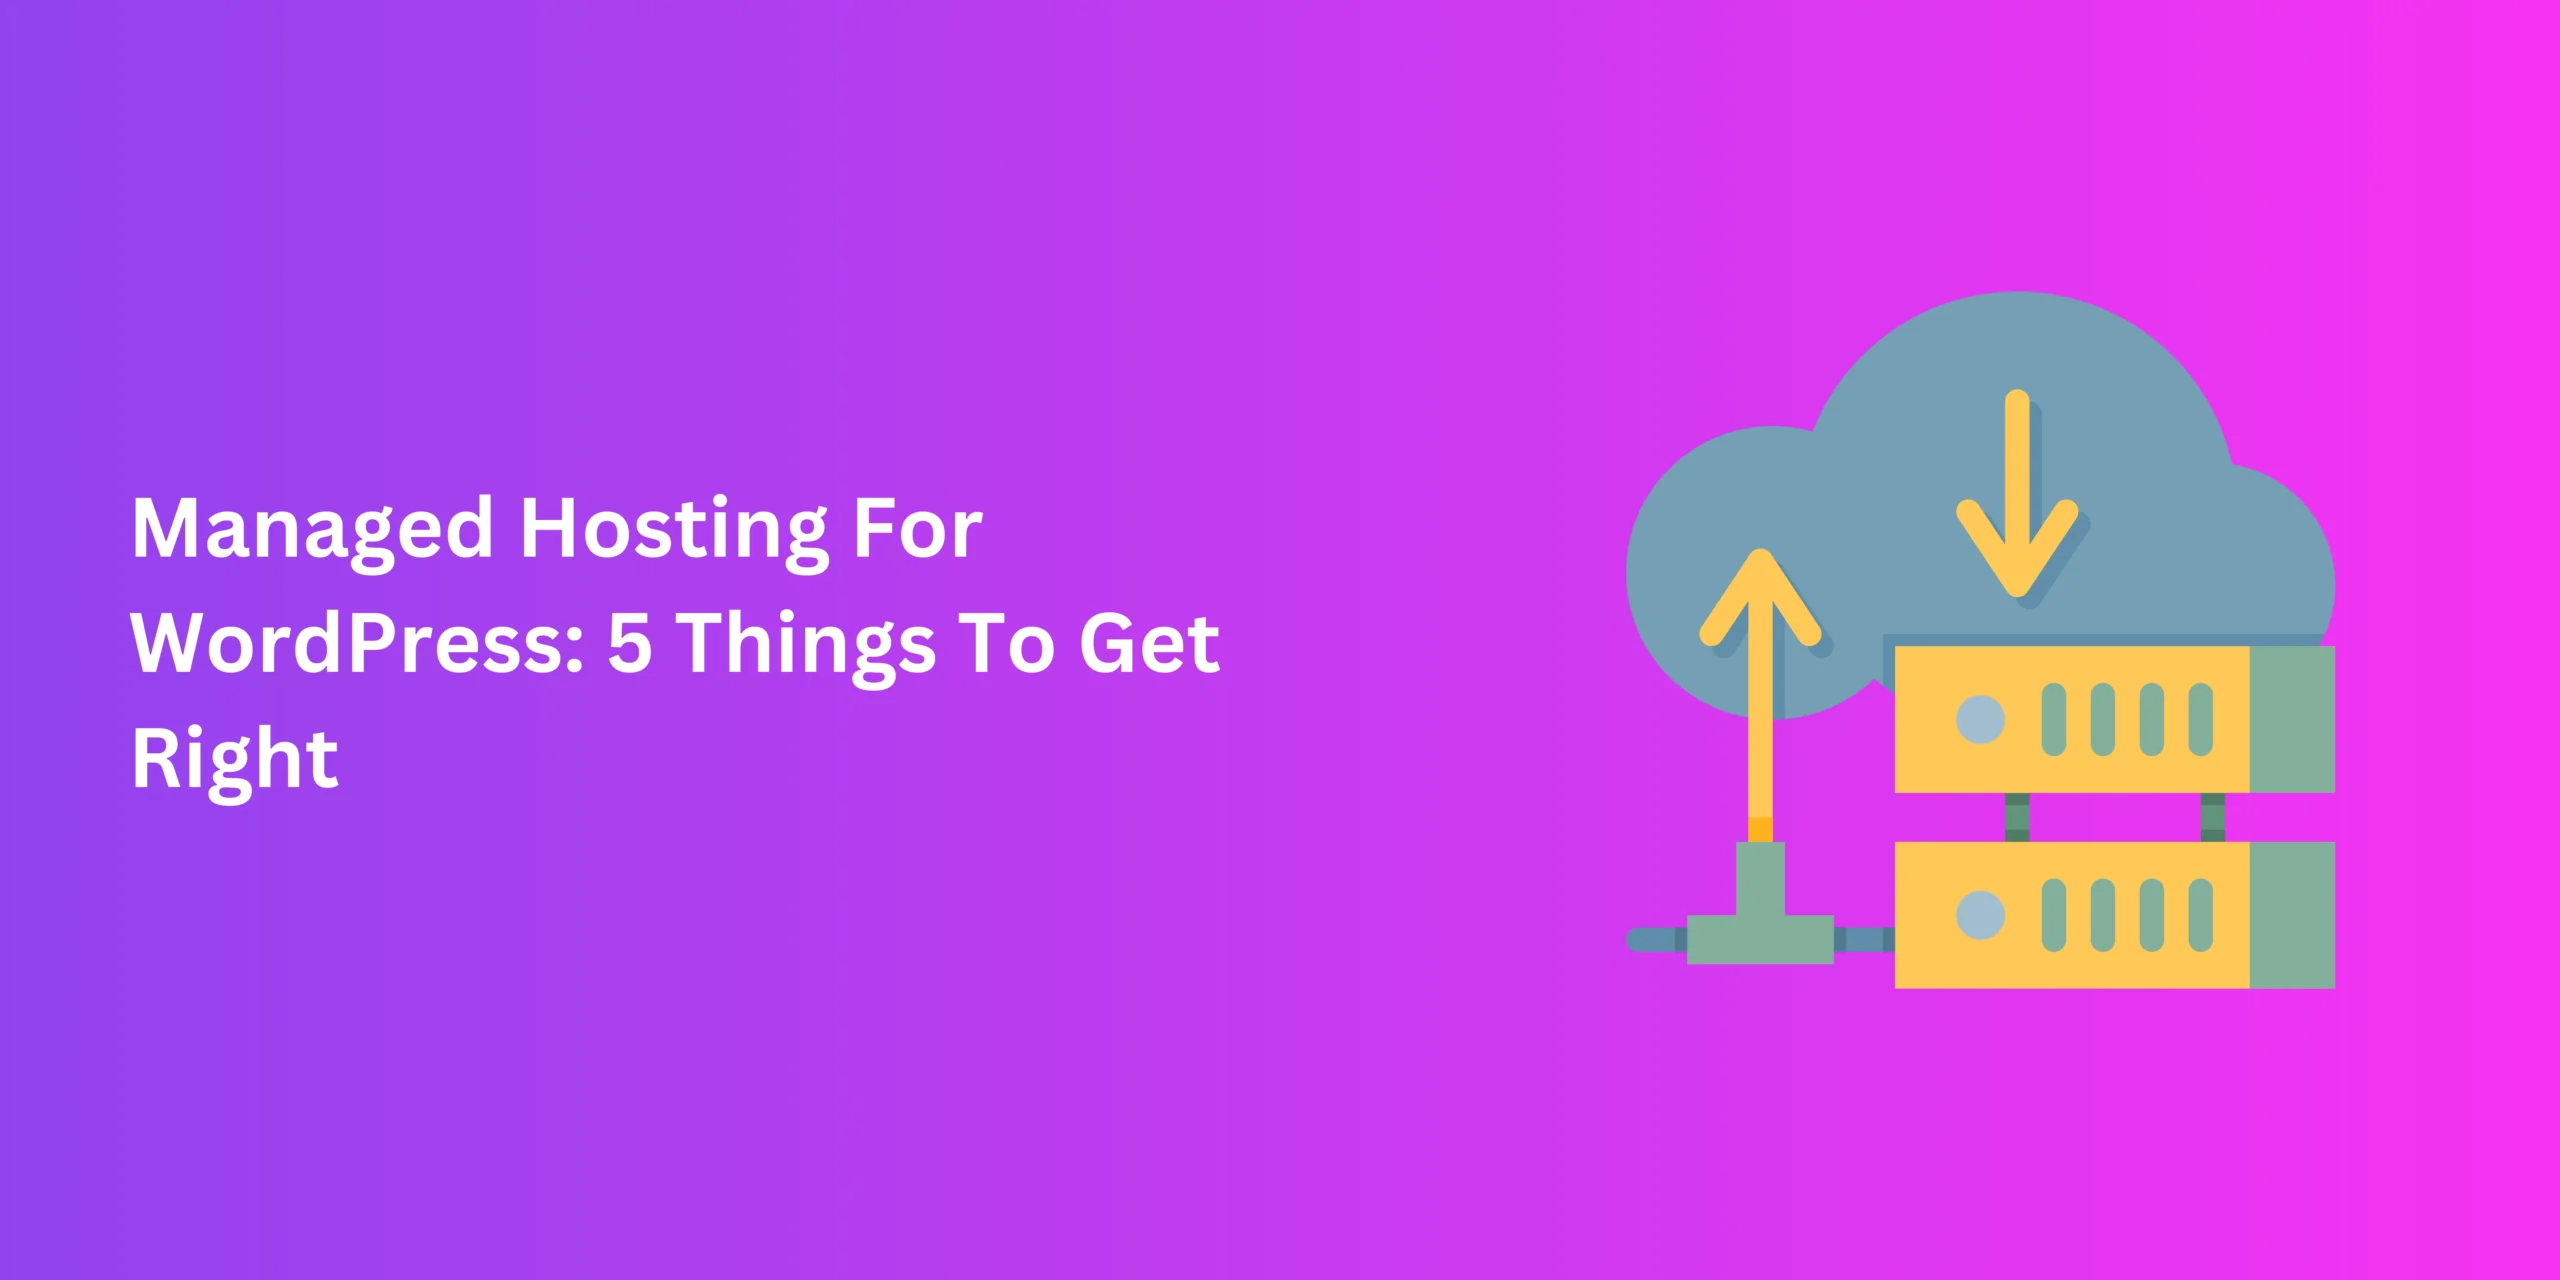 Managed Hosting For WordPress: 5 Things To Get Right